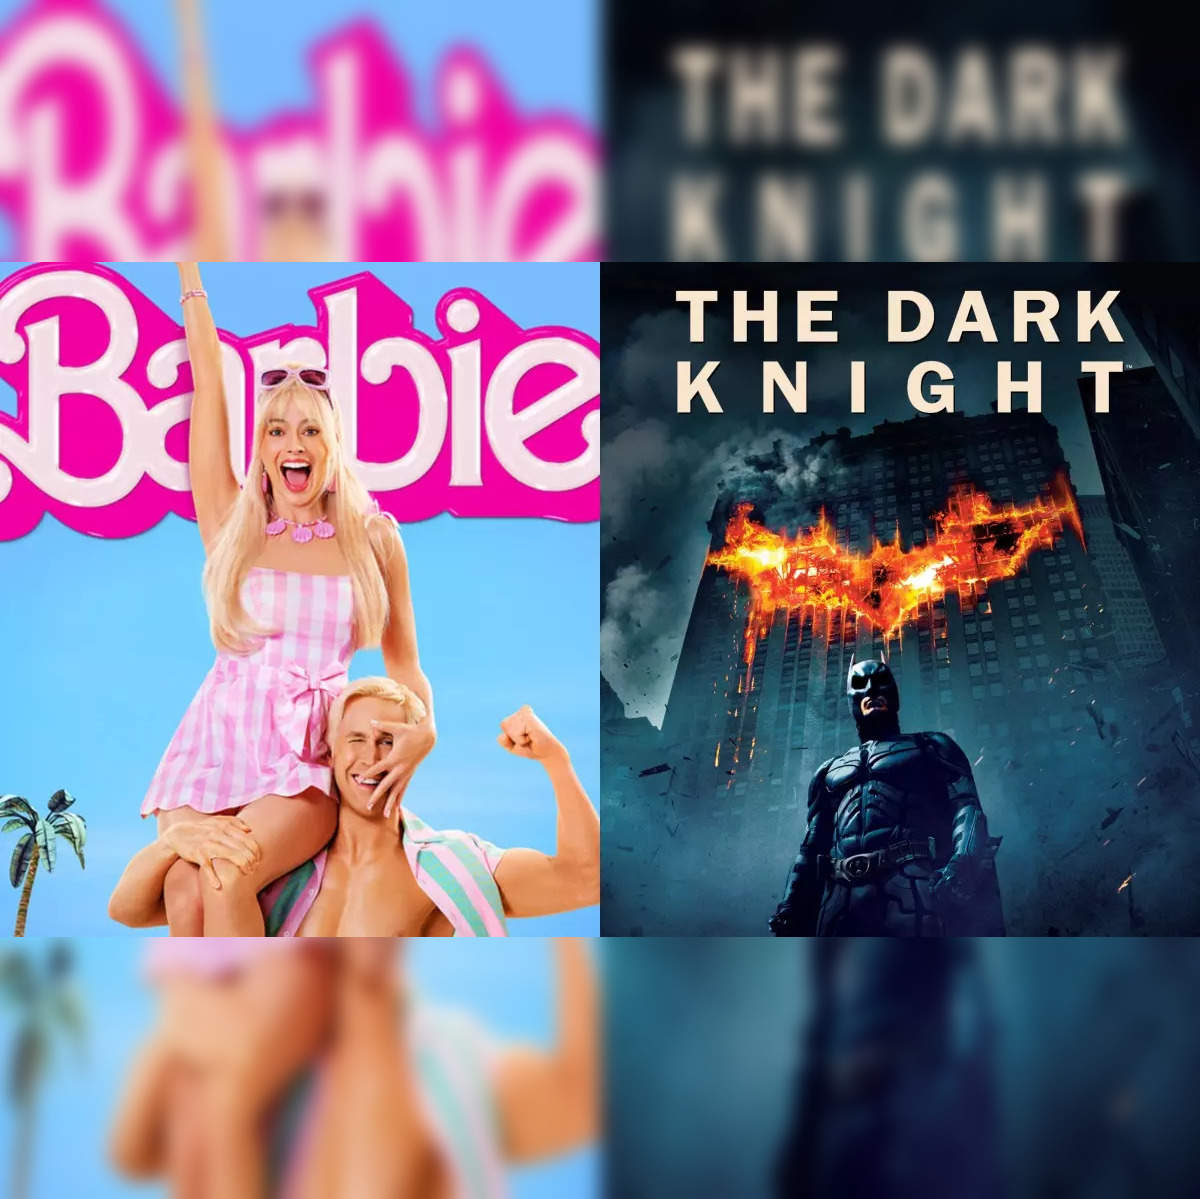 Barbie: Barbie beats The Dark Knight, another Christopher Nolan film, to be  No.1 domestic film of Warner Bros. - The Economic Times